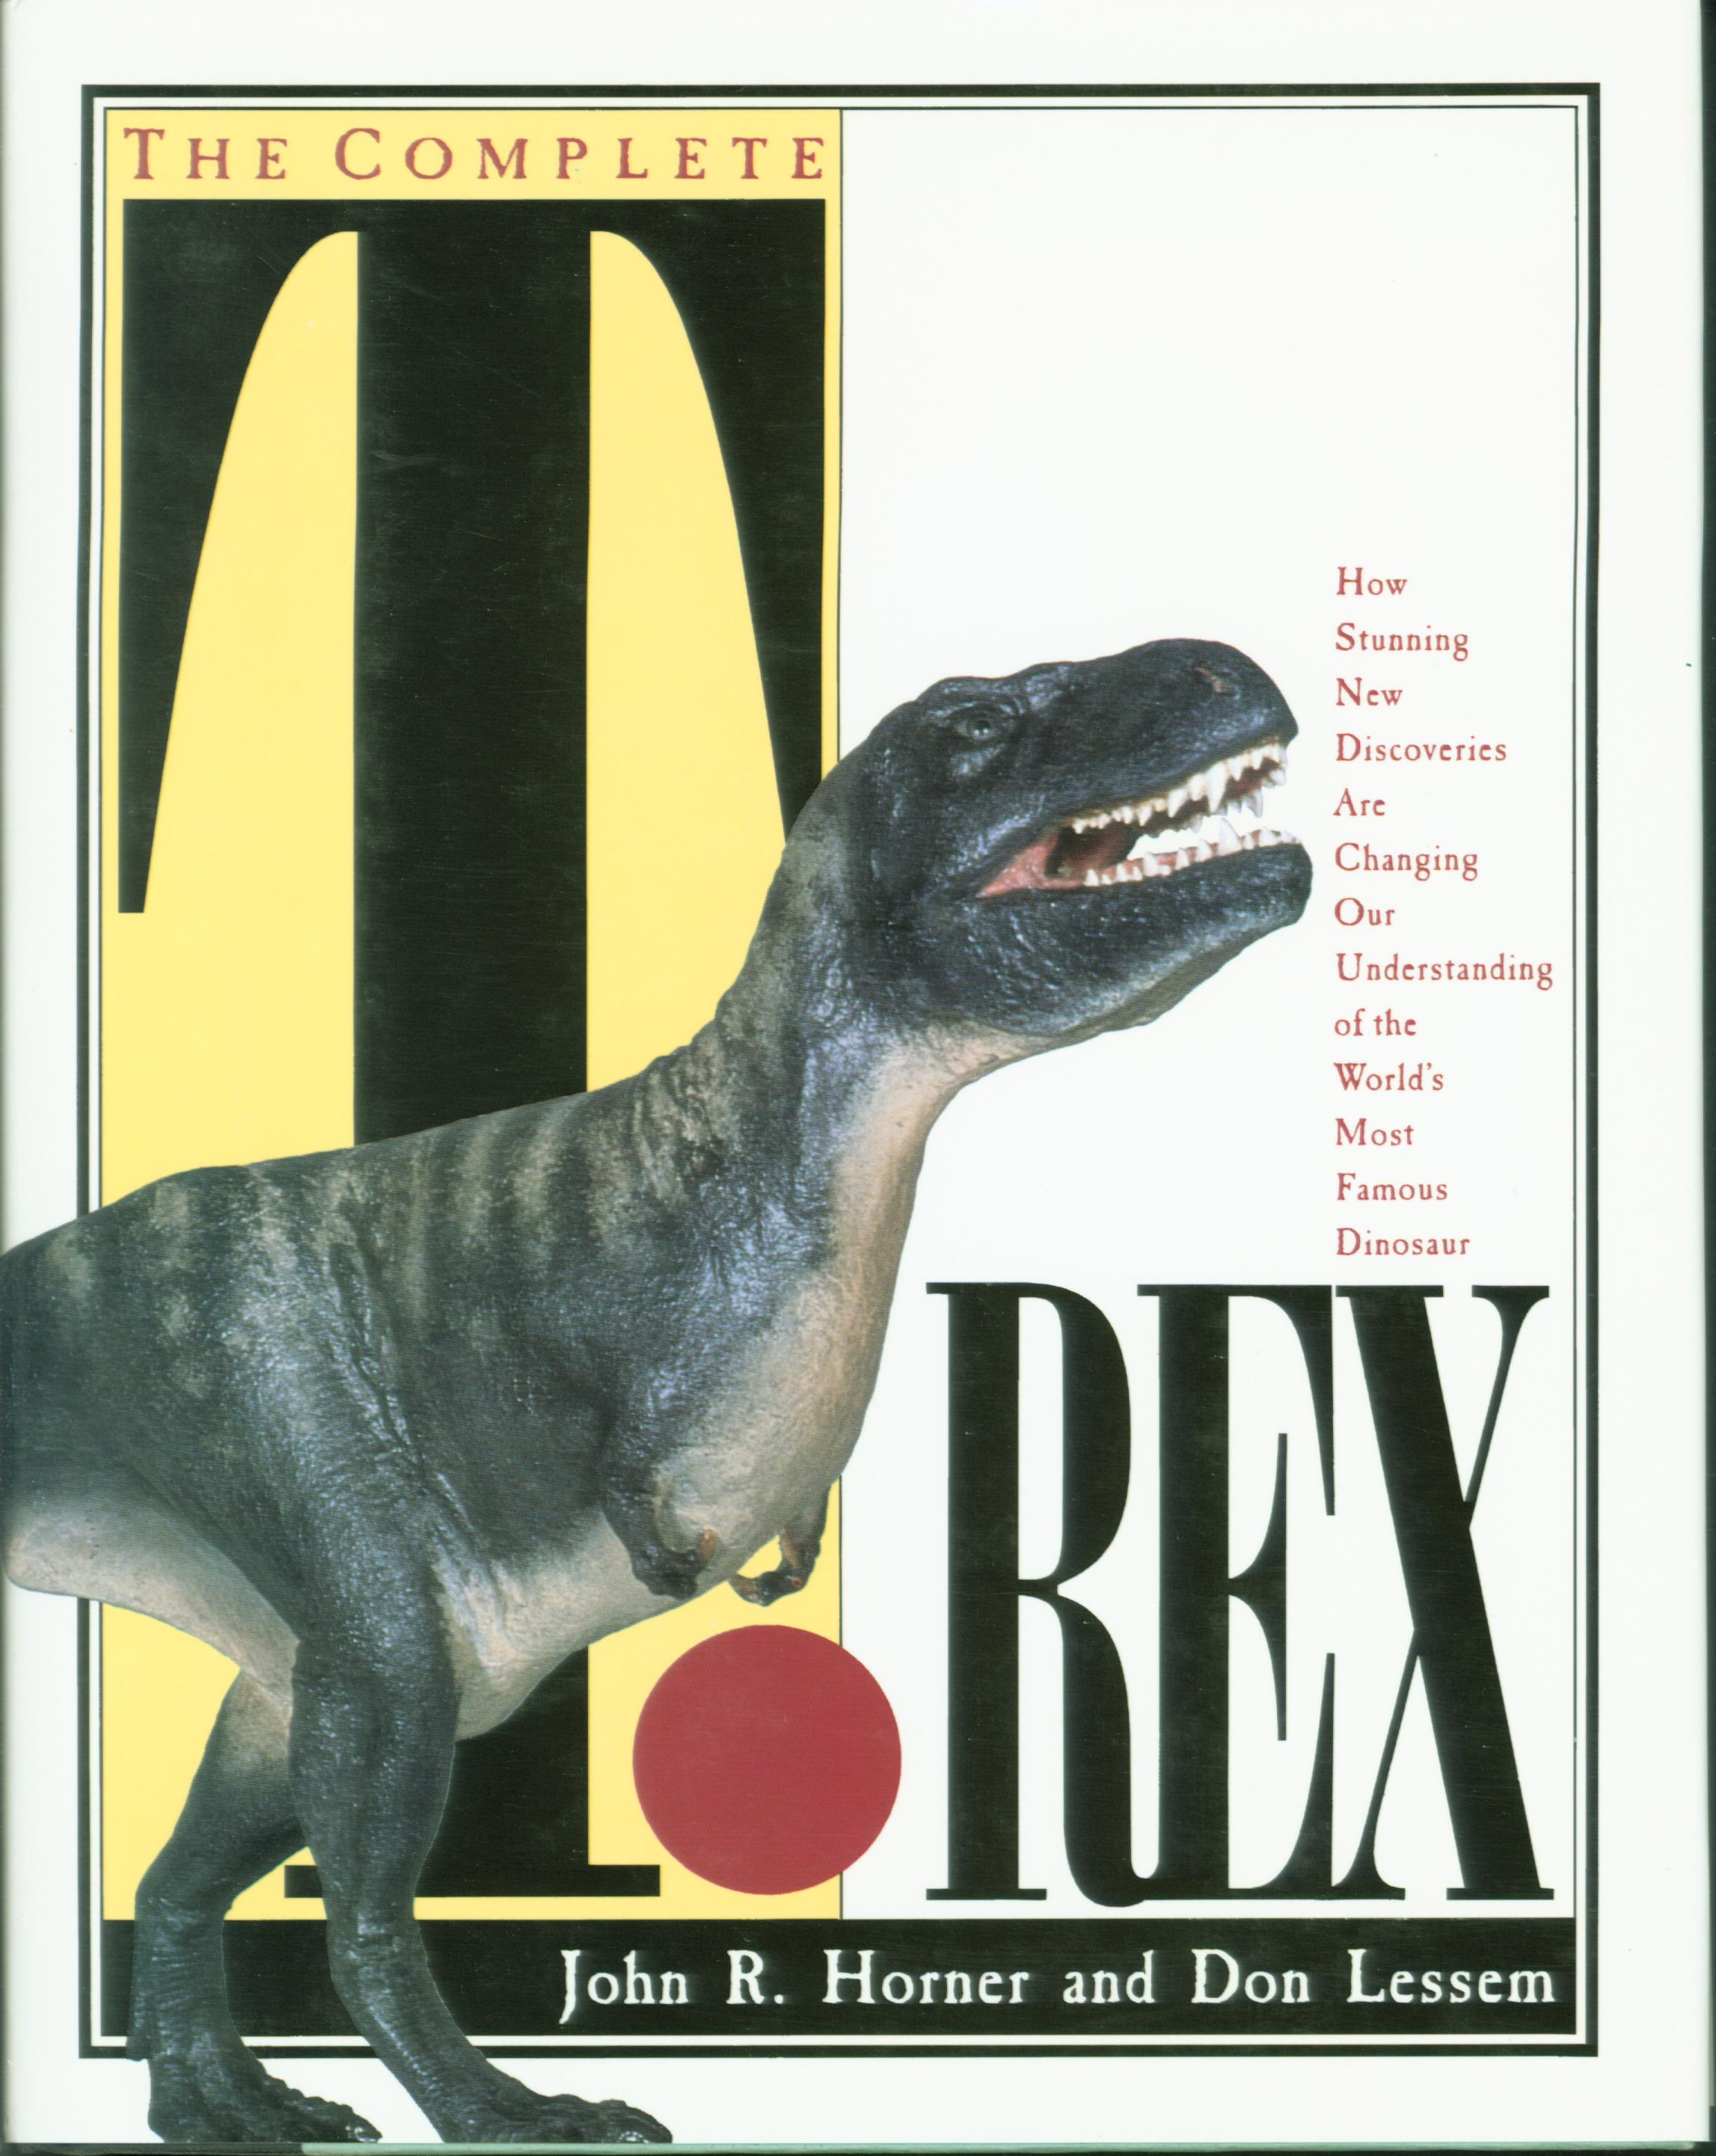 THE COMPLETE T. REX--cloth.